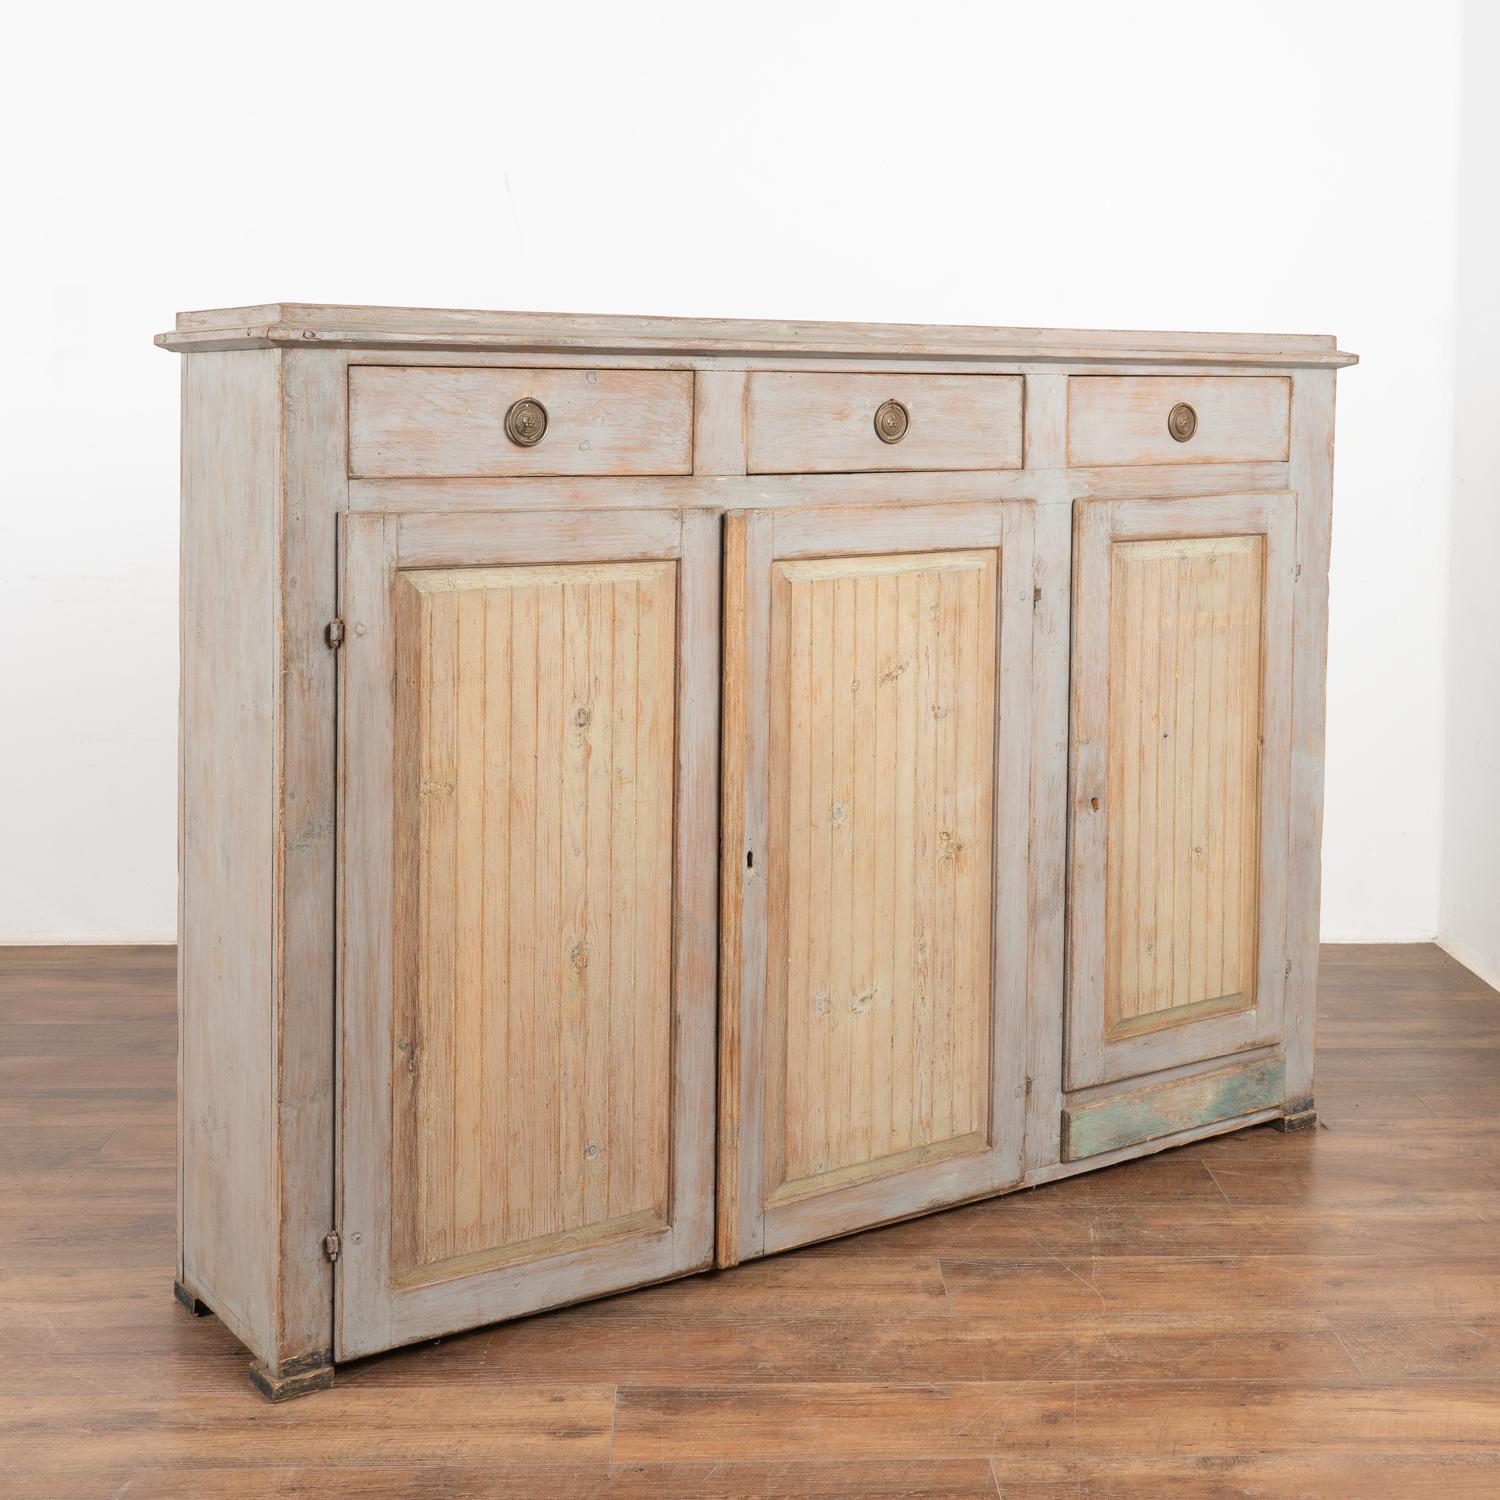 Swedish country 4' tall pine sideboard with original pale blue/gray painted finish. Three simple grooved panel doors with contrasting antique white painted finish, all lightly distressed through generations of use. 
Please refer to photos of 